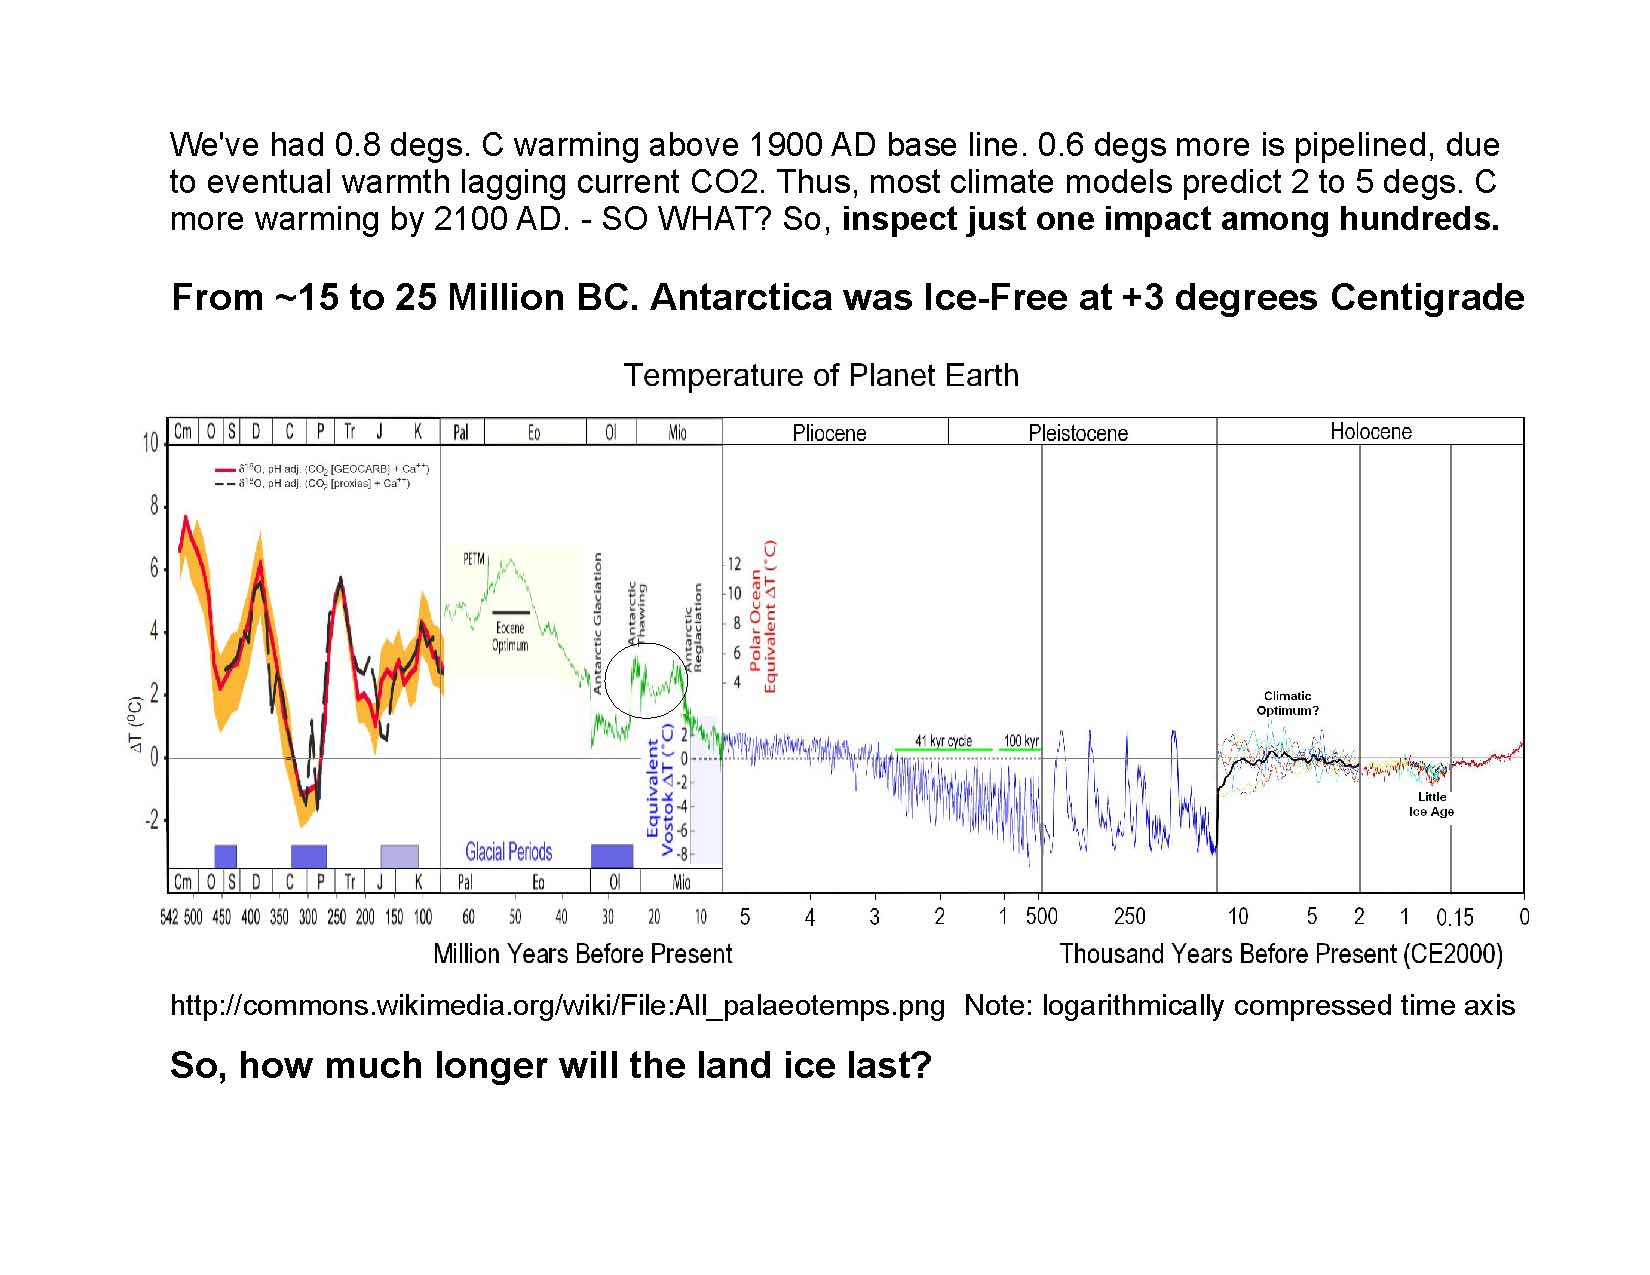 The last time we were over 2.0 degs C., Antarctica was ice-free.